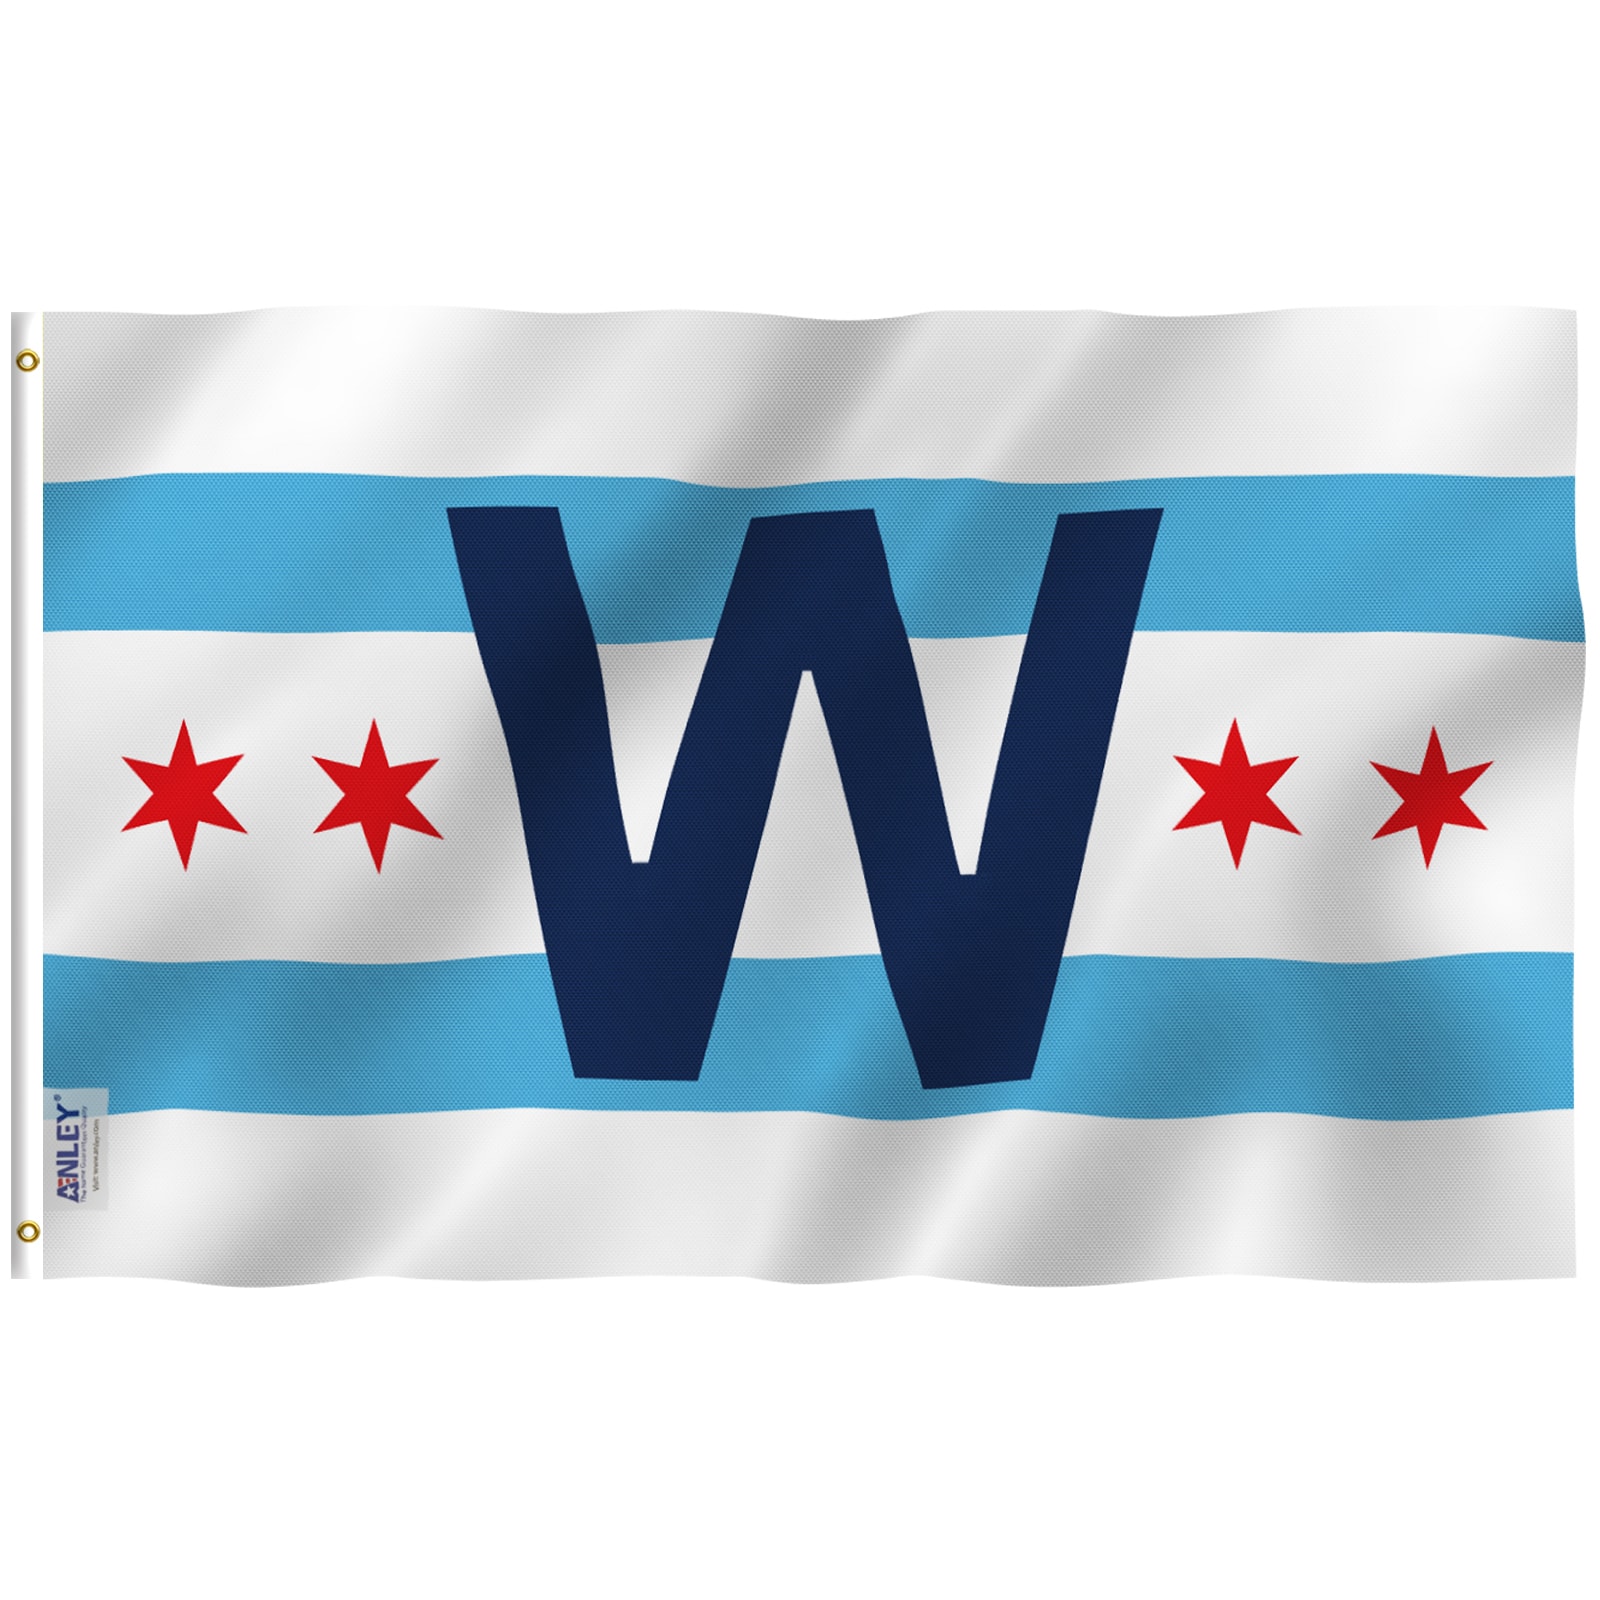 Anley Chicago Cub Win Combo Flag 5-ft W x 3-ft H American Flag in